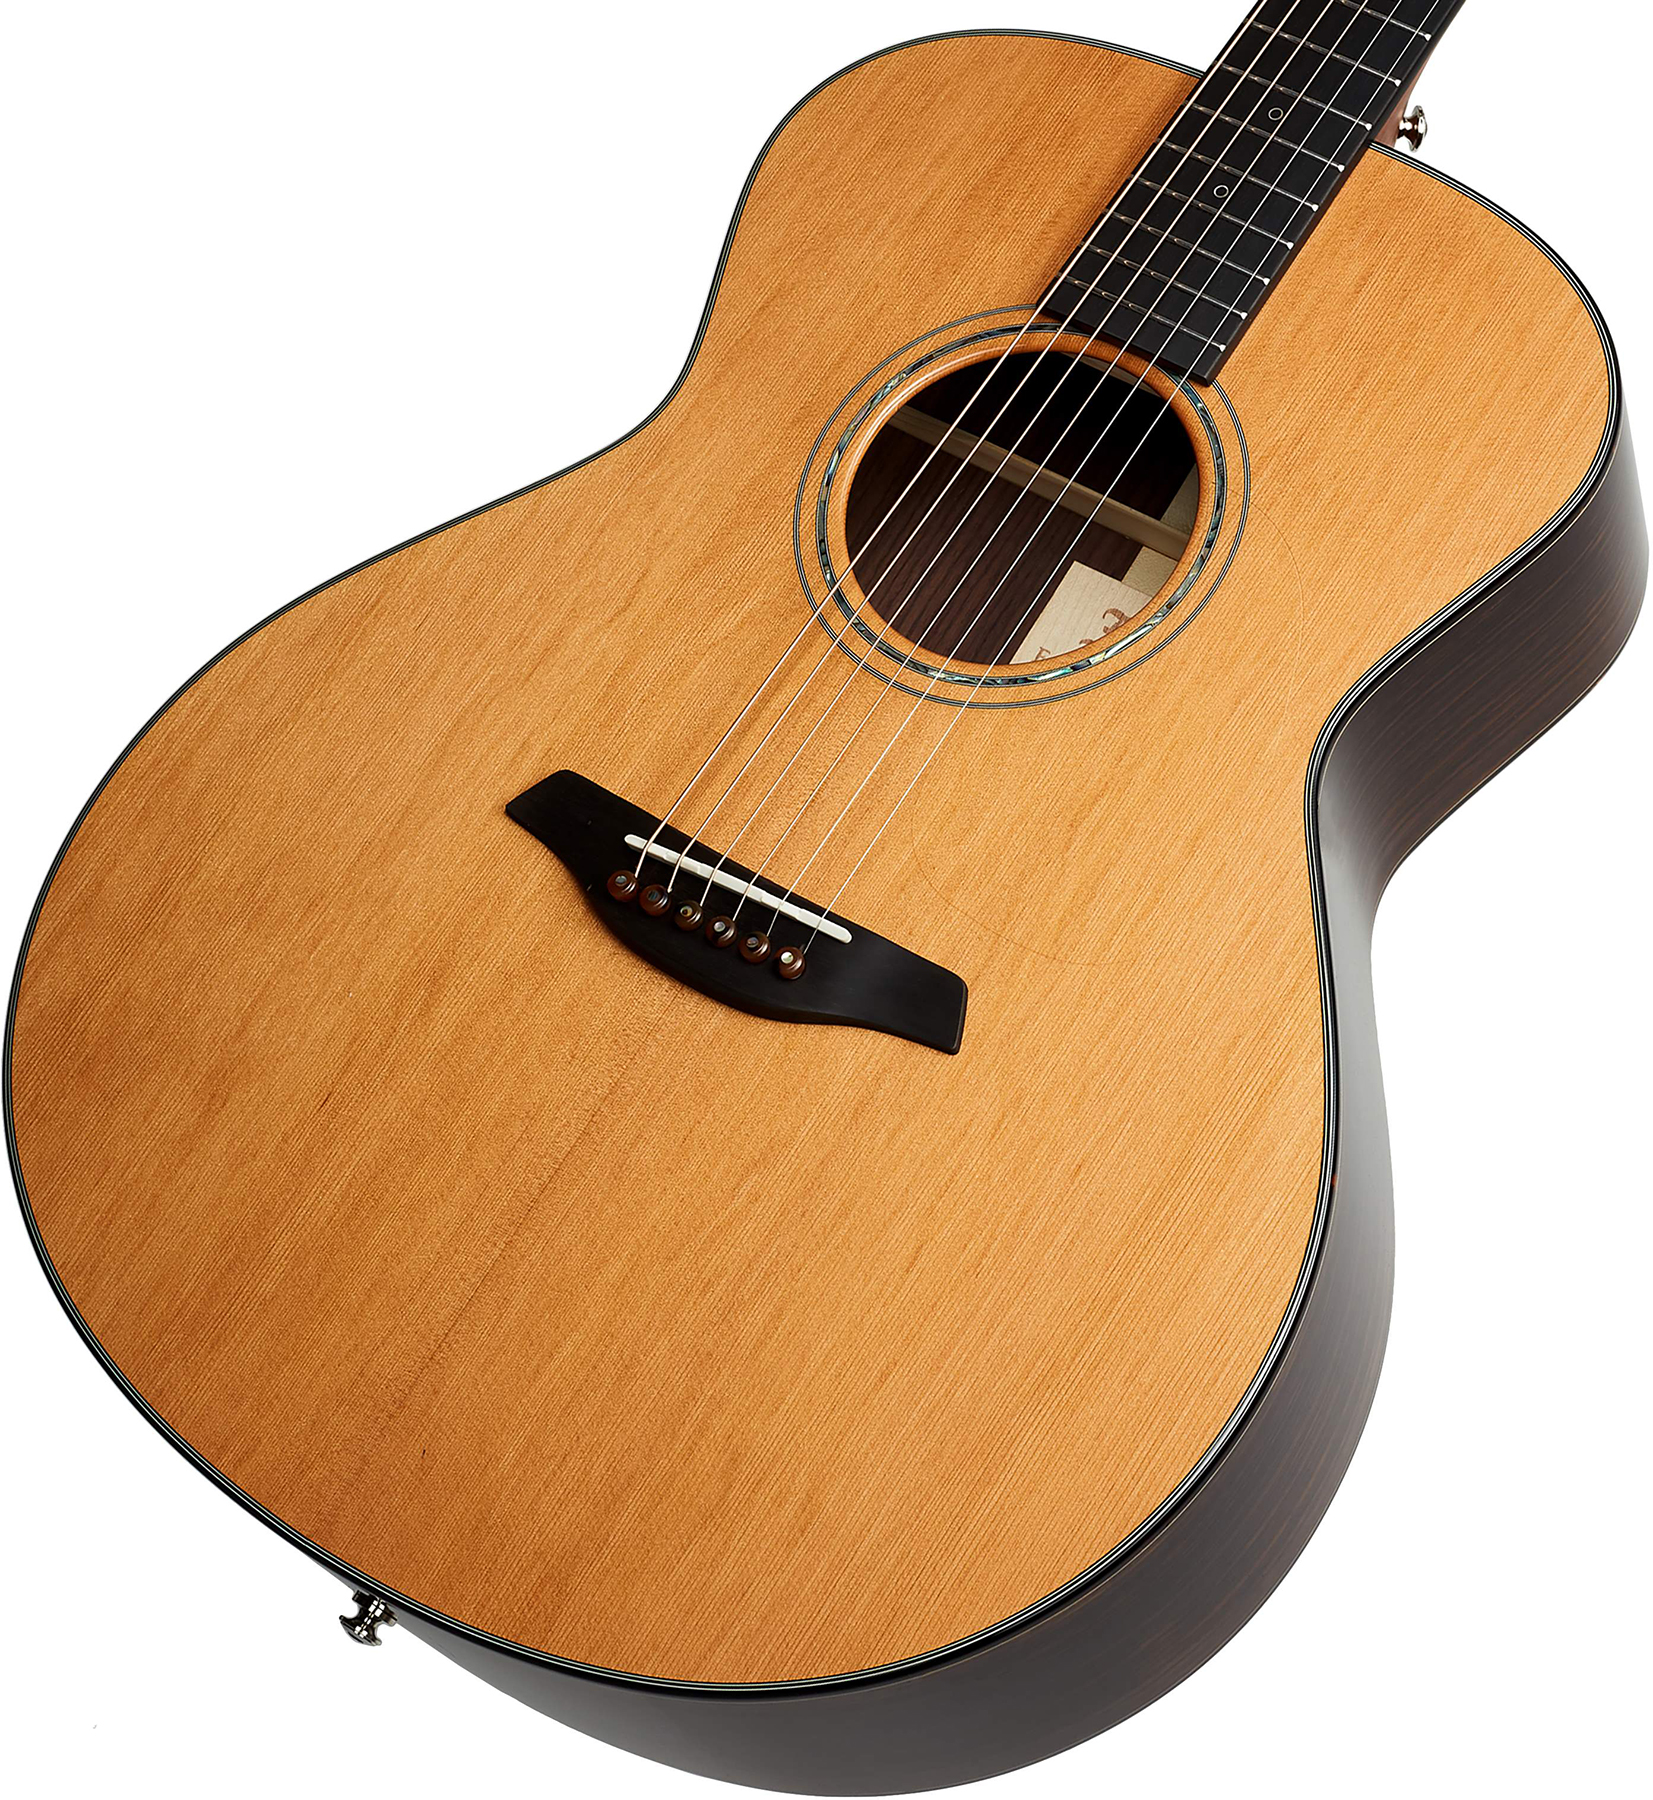 Furch G-cr Yellow Grand Auditorium Cedre Palissandre Eb - Natural Full-pore - Acoustic guitar & electro - Variation 2